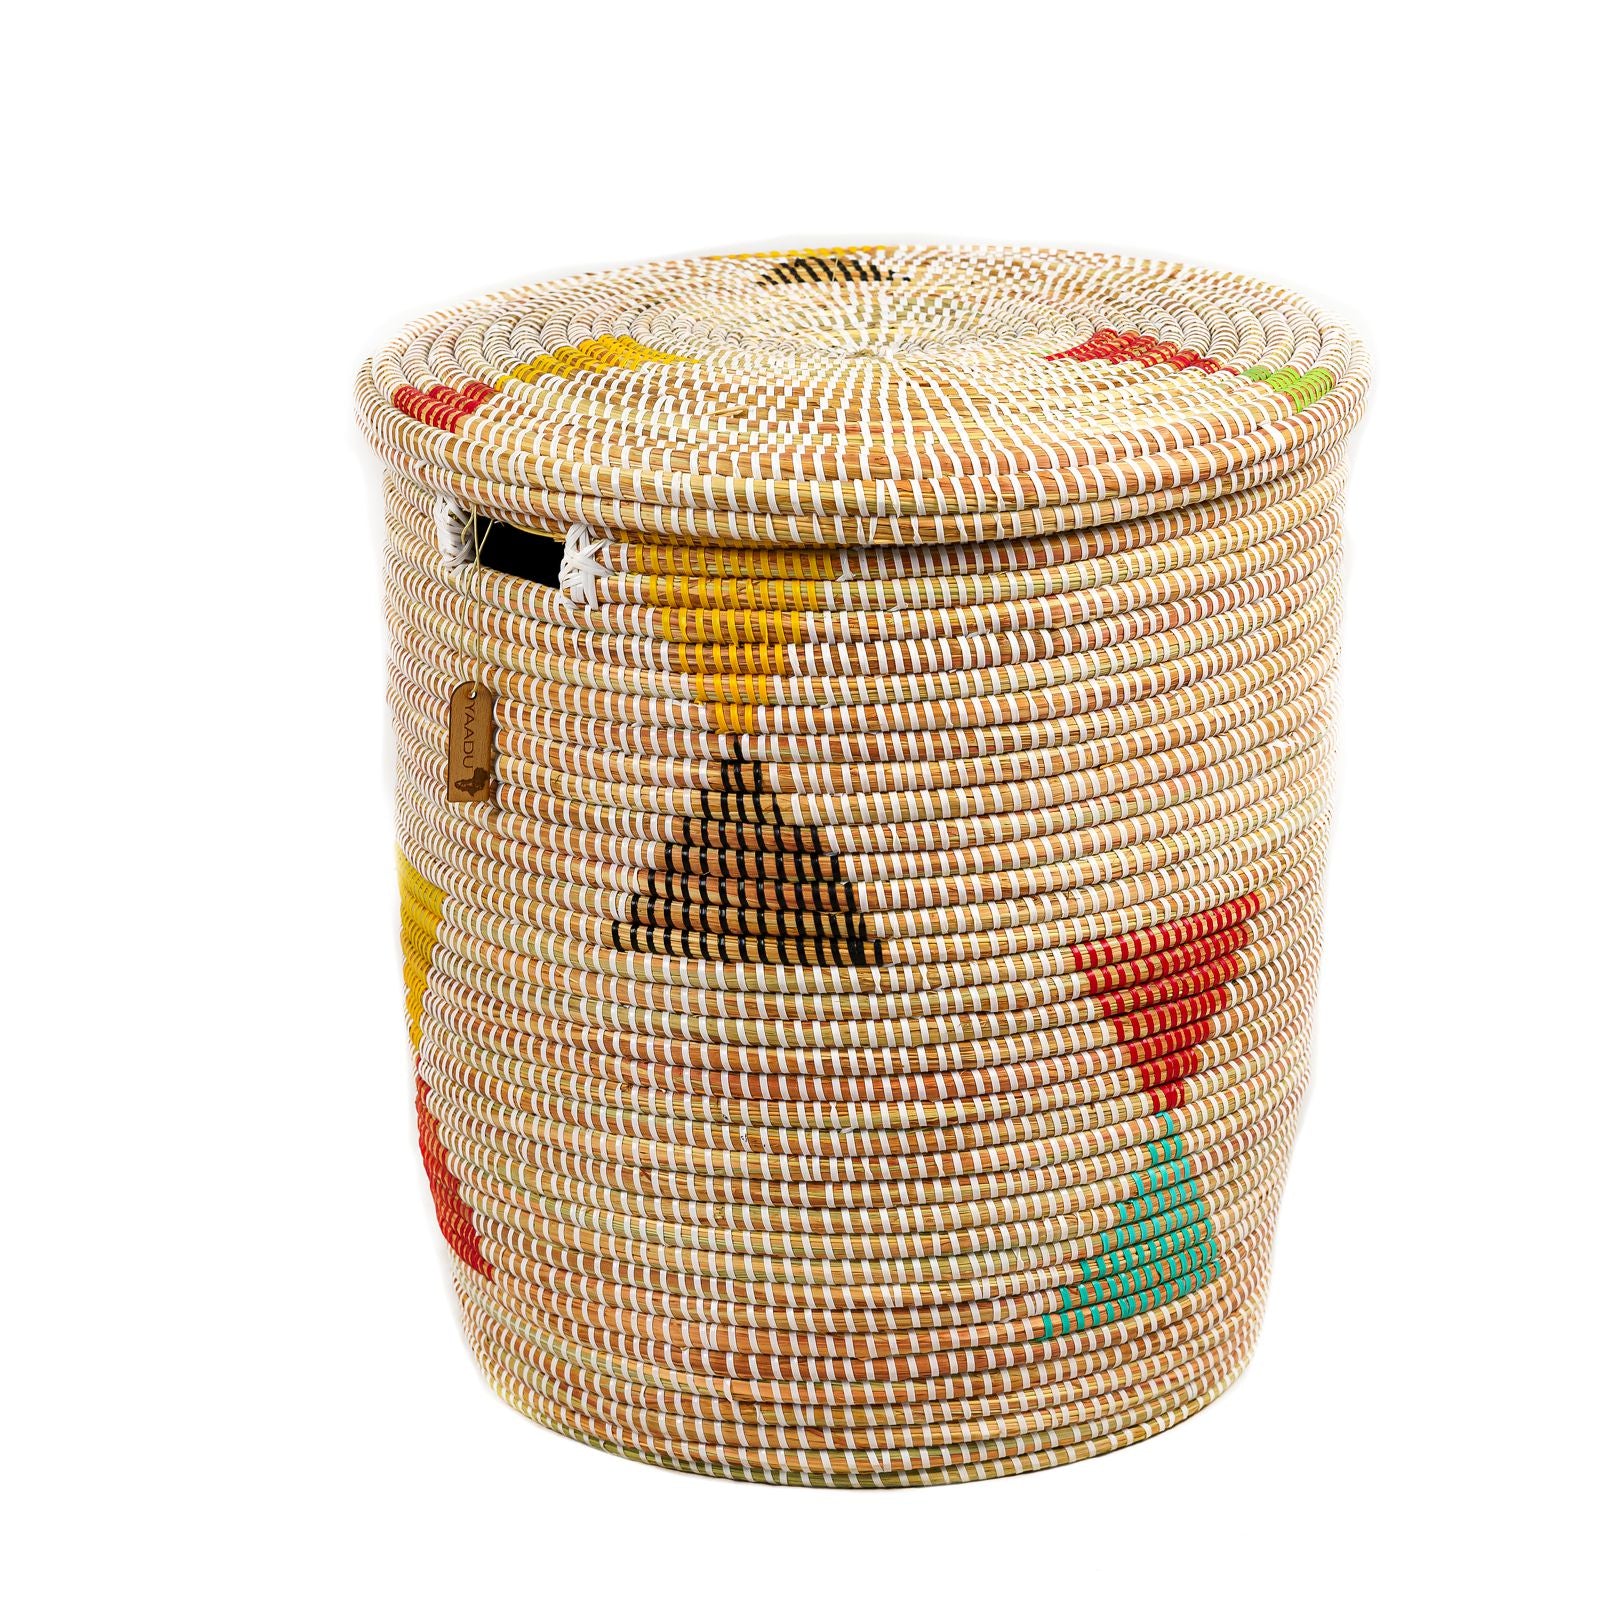 Set: African laundry baskets with lids - white / colorful